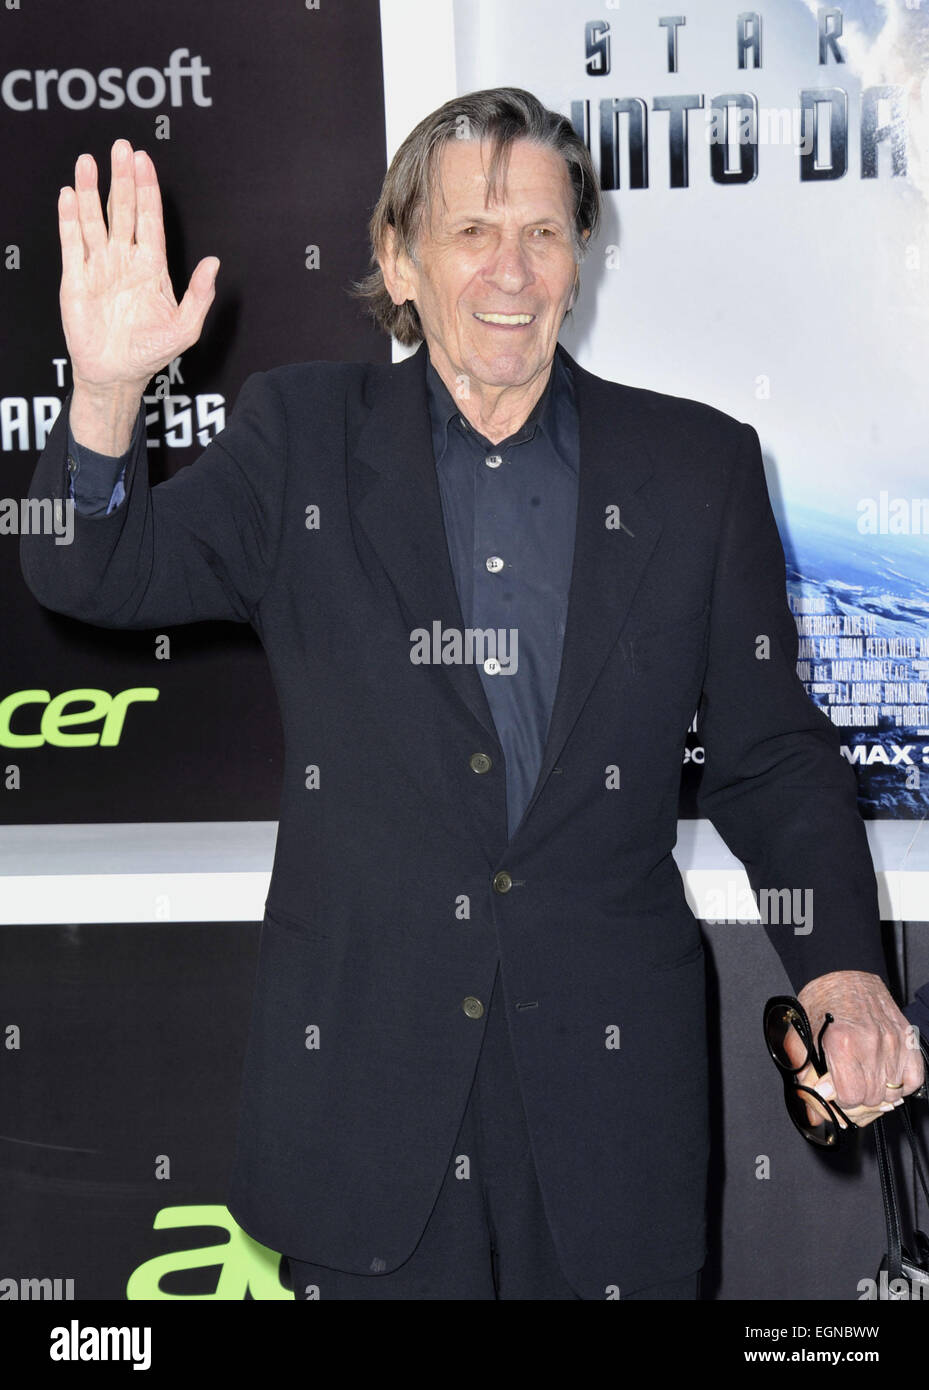 File. 27th Feb, 2015. LEONARD NIMOY, the actor who won a global following as Mr. Spock, the alien first officer of the Starship Enterprise in the television and movie series 'Star Trek, ' died on Friday morning at his home in the Bel Air, Los Angeles. He was 83. His wife, Susan Bay Nimoy, confirmed his death, saying the cause was end-stage chronic obstructive pulmonary disease. Pictured - May 14, 2013 - Los Angeles, California, U.S. - Leonard Nimoy attending the premiere of 'Star Trek Into Darkness.' © D. Long/Globe Photos/ZUMAPRESS.com/Alamy Live News Stock Photo